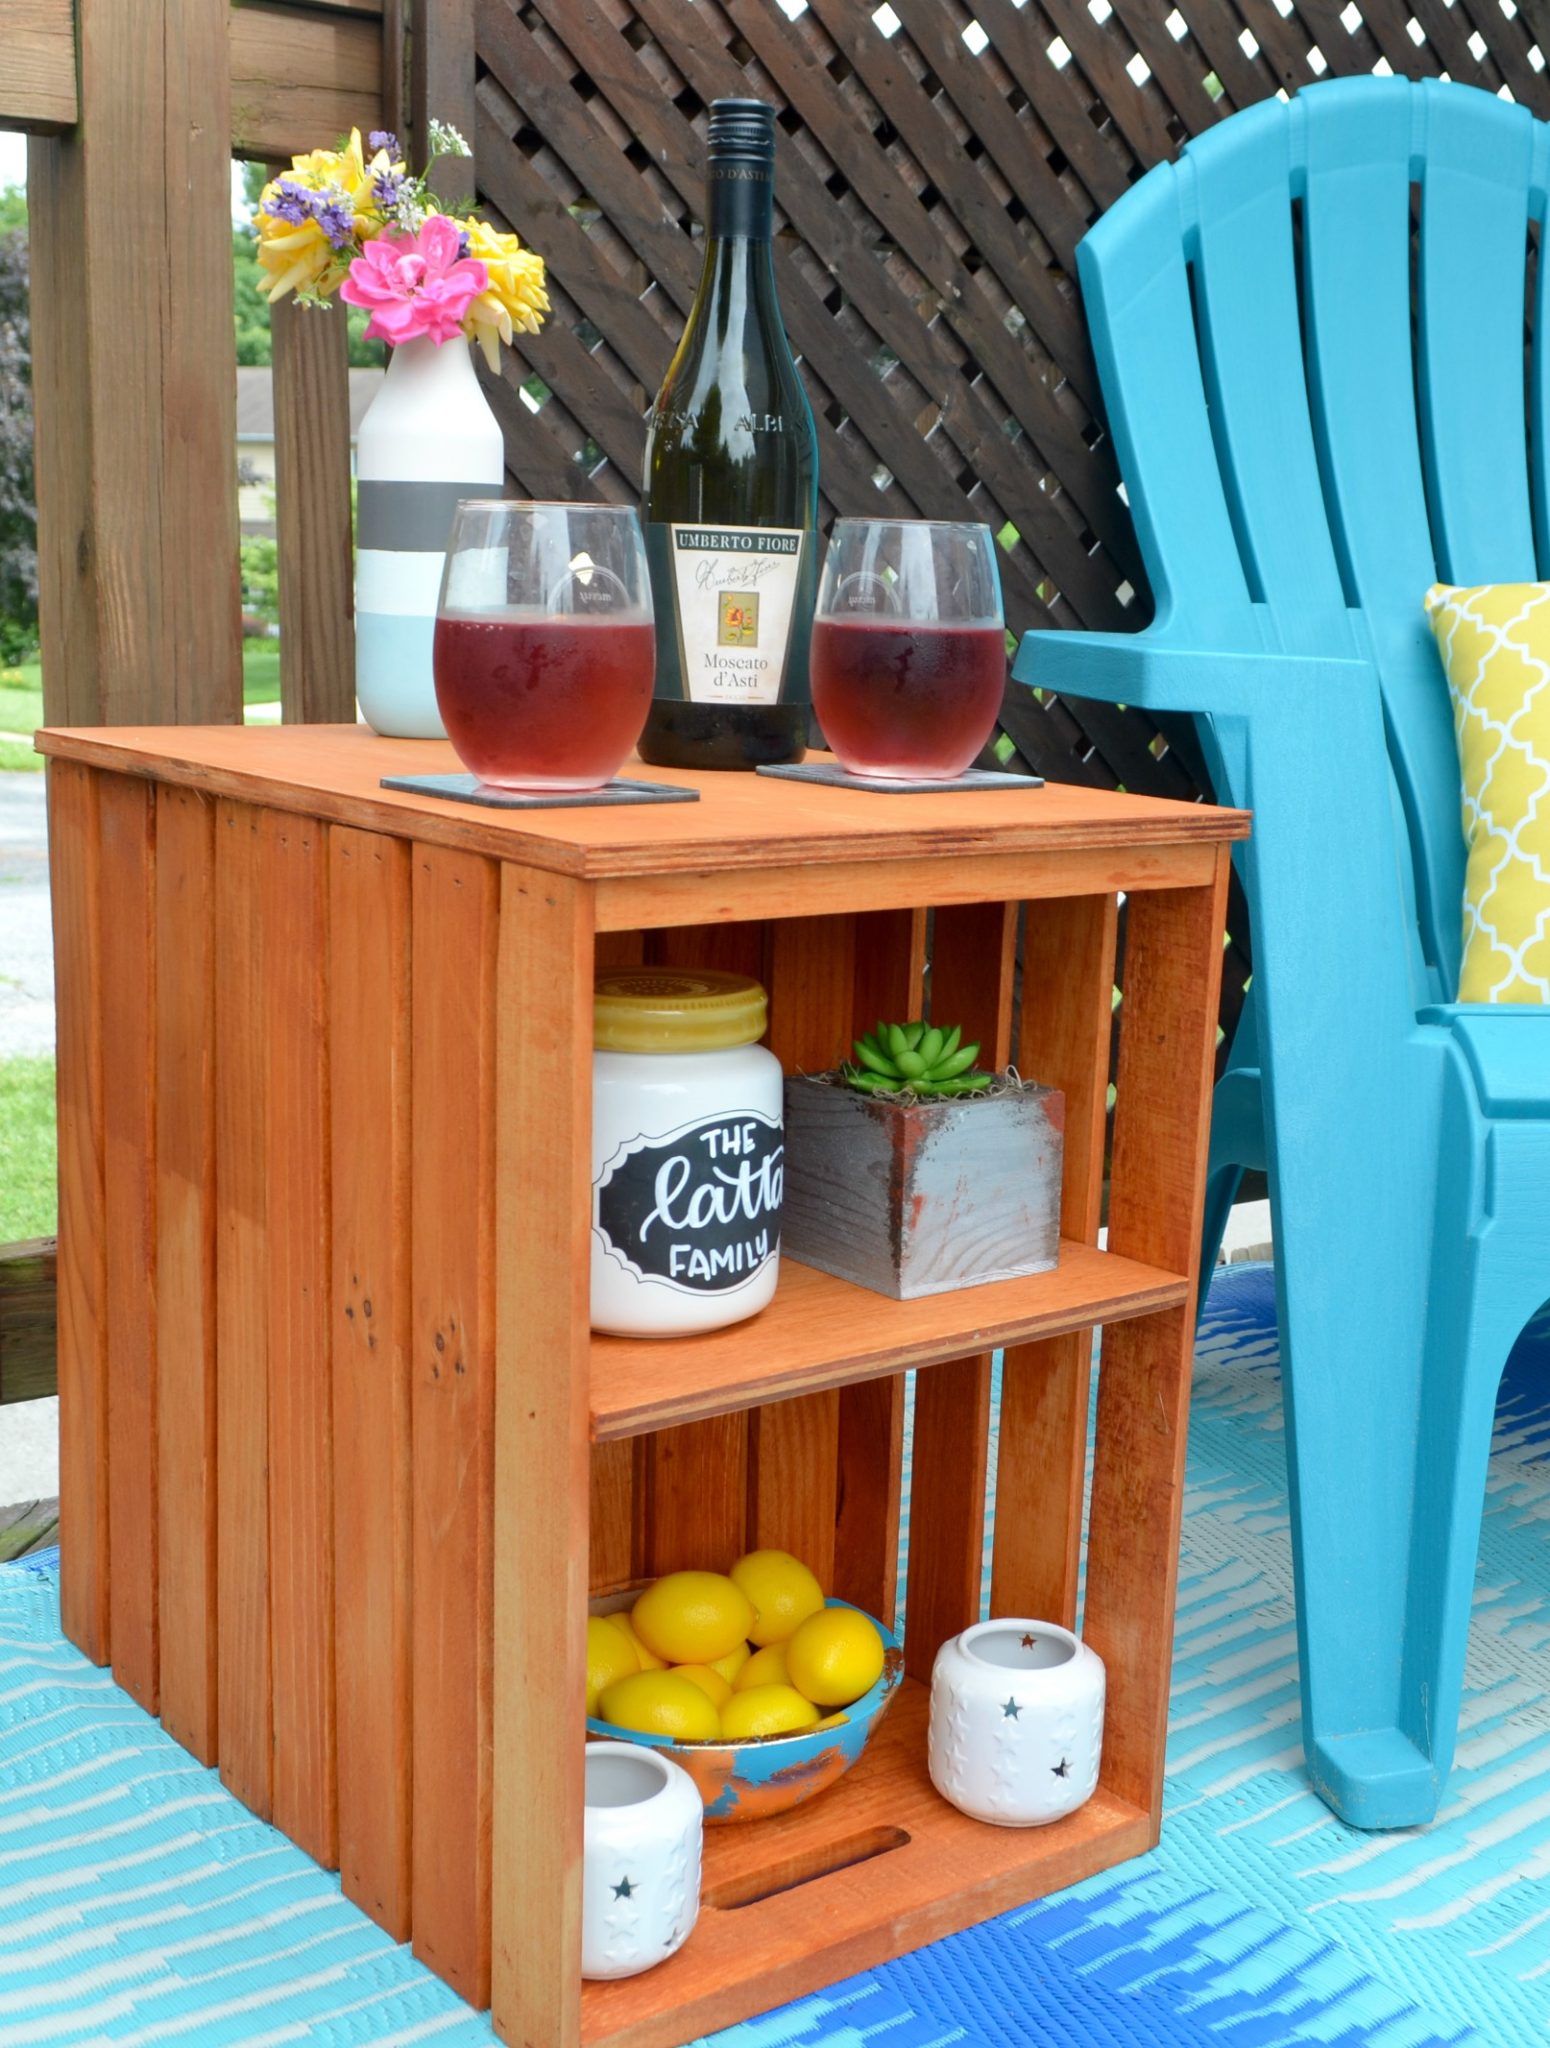 DIY Outdoor Table with Crates